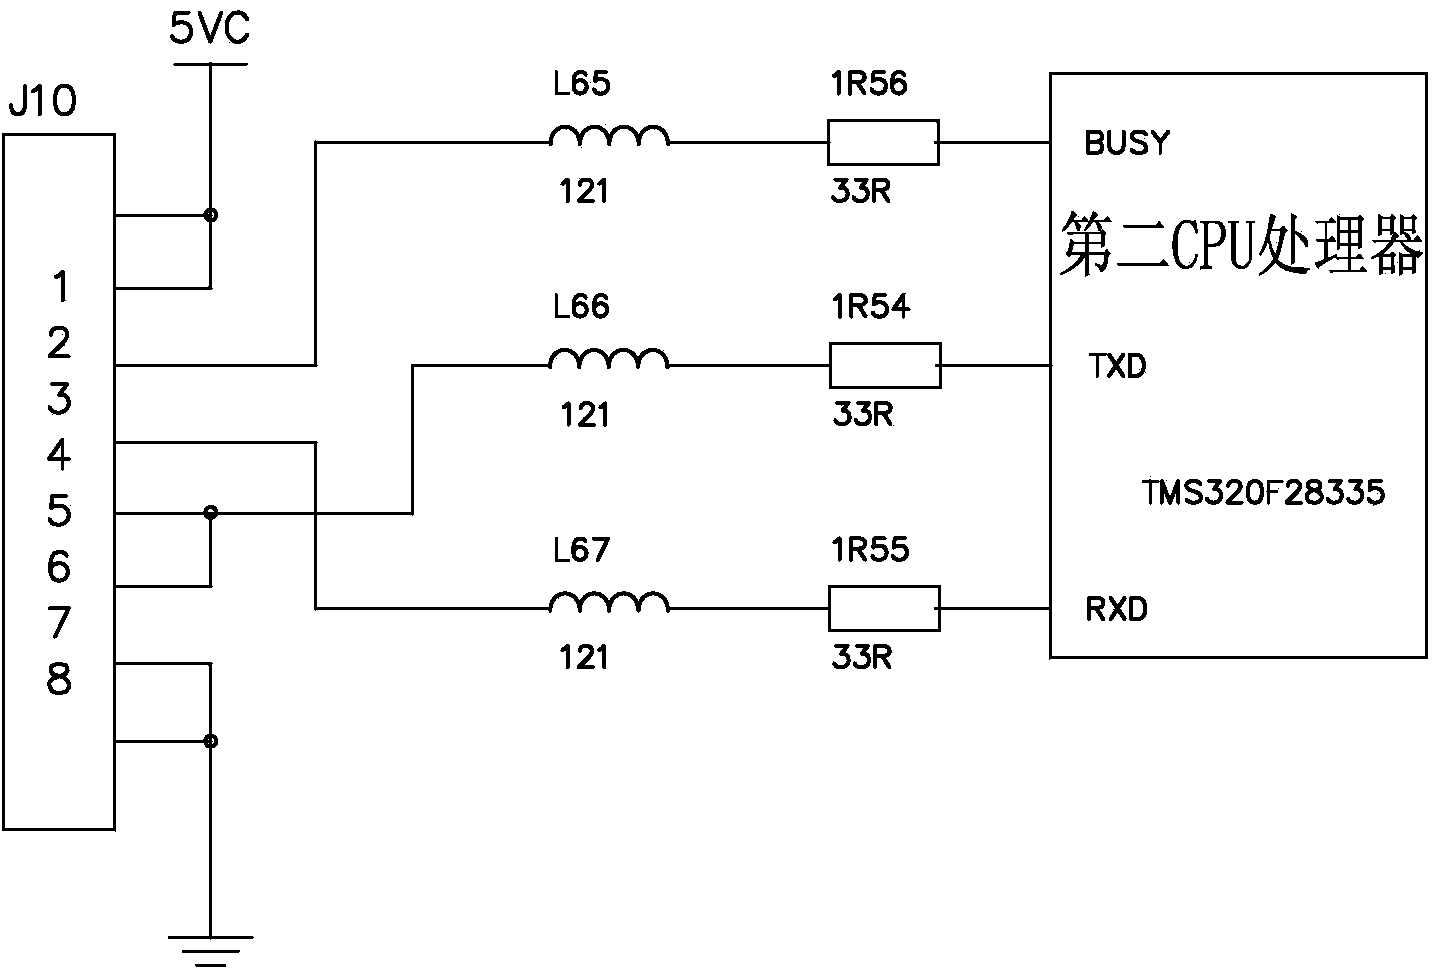 Insulation monitoring device and method for DC system